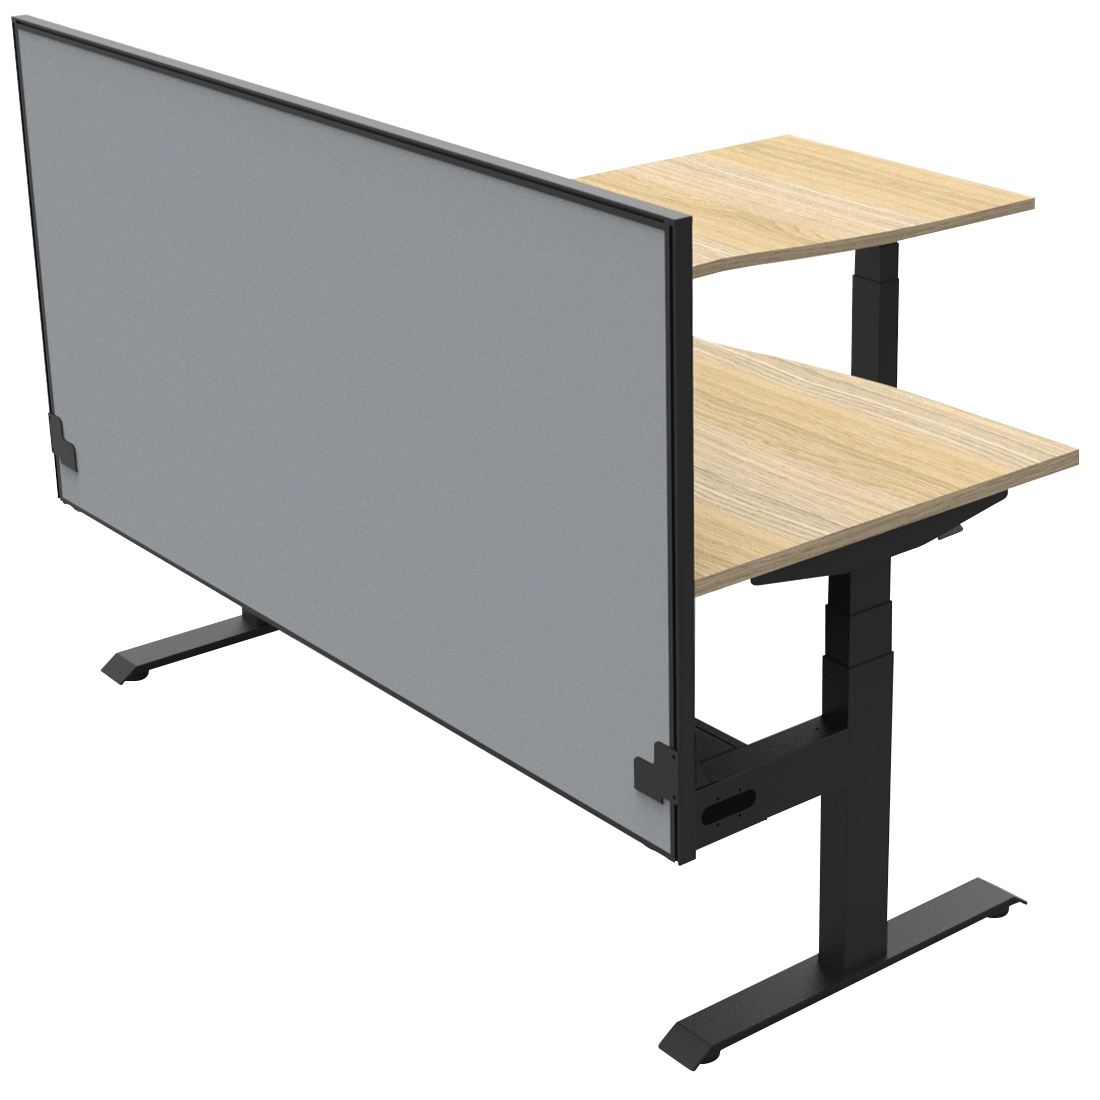 Boost Height Adjustable Corner + Cable Tray and Screen - switchoffice.com.au